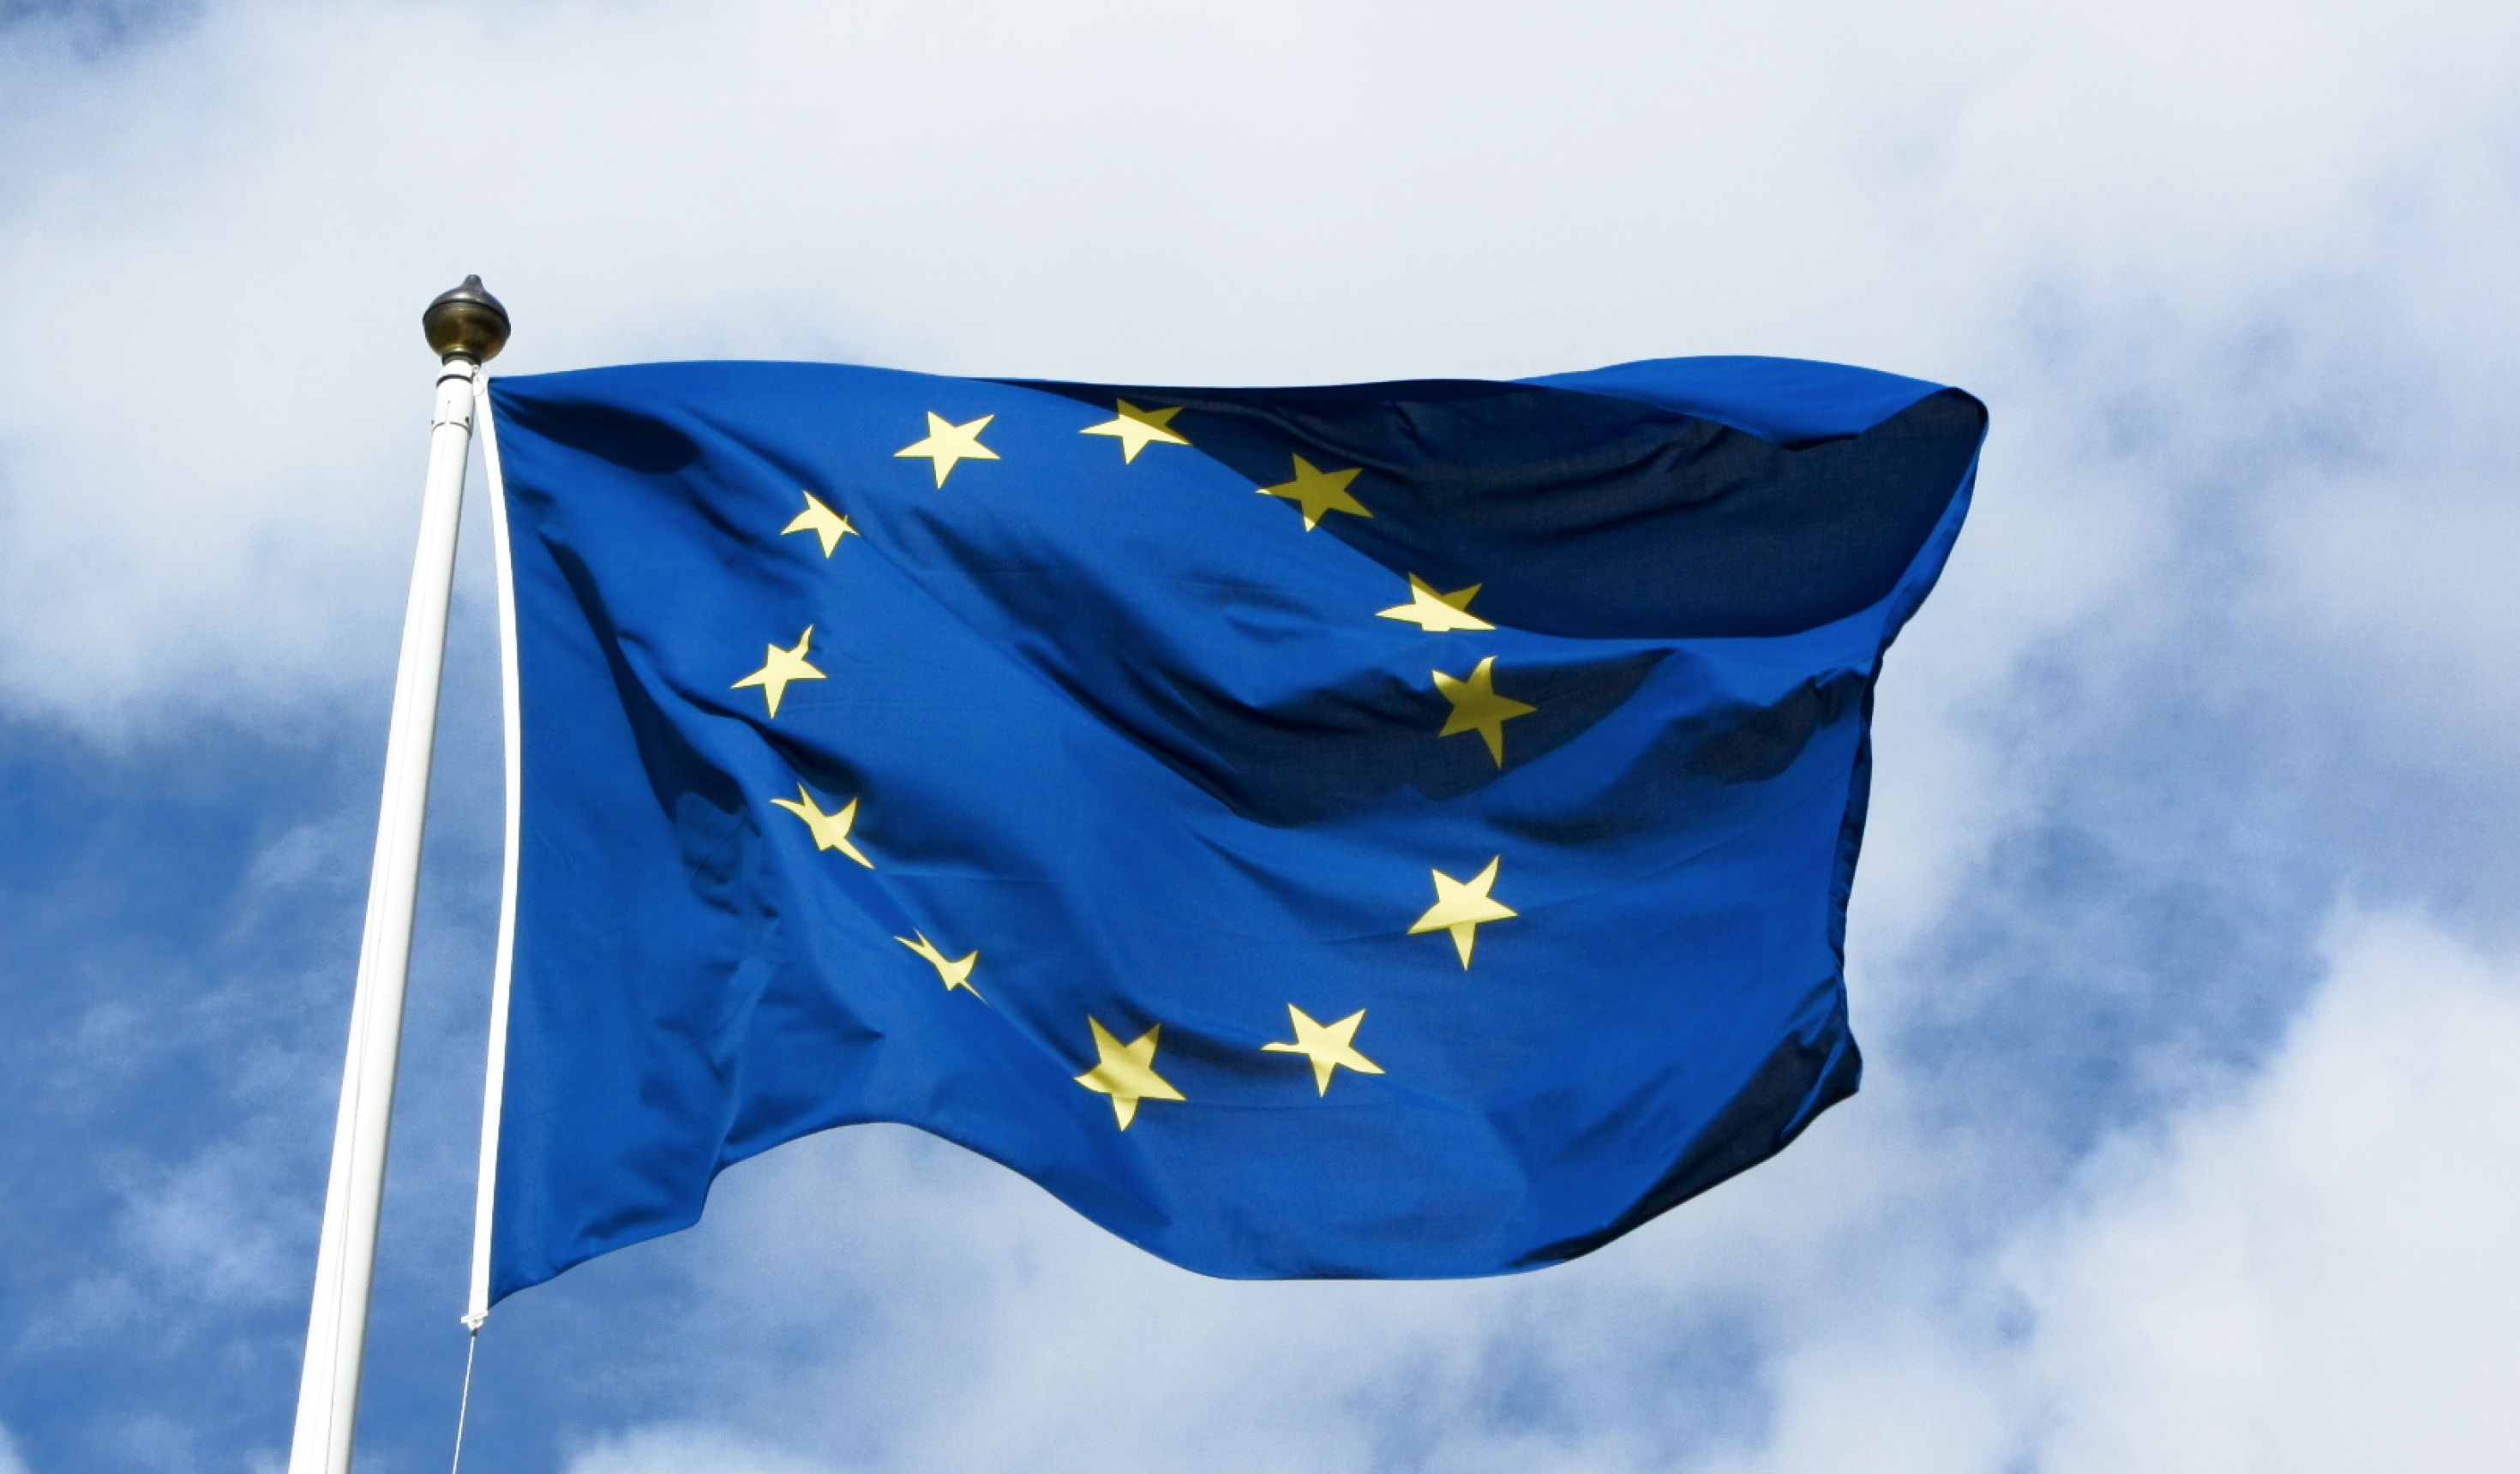 A picture of the EU flag blowing in the wind